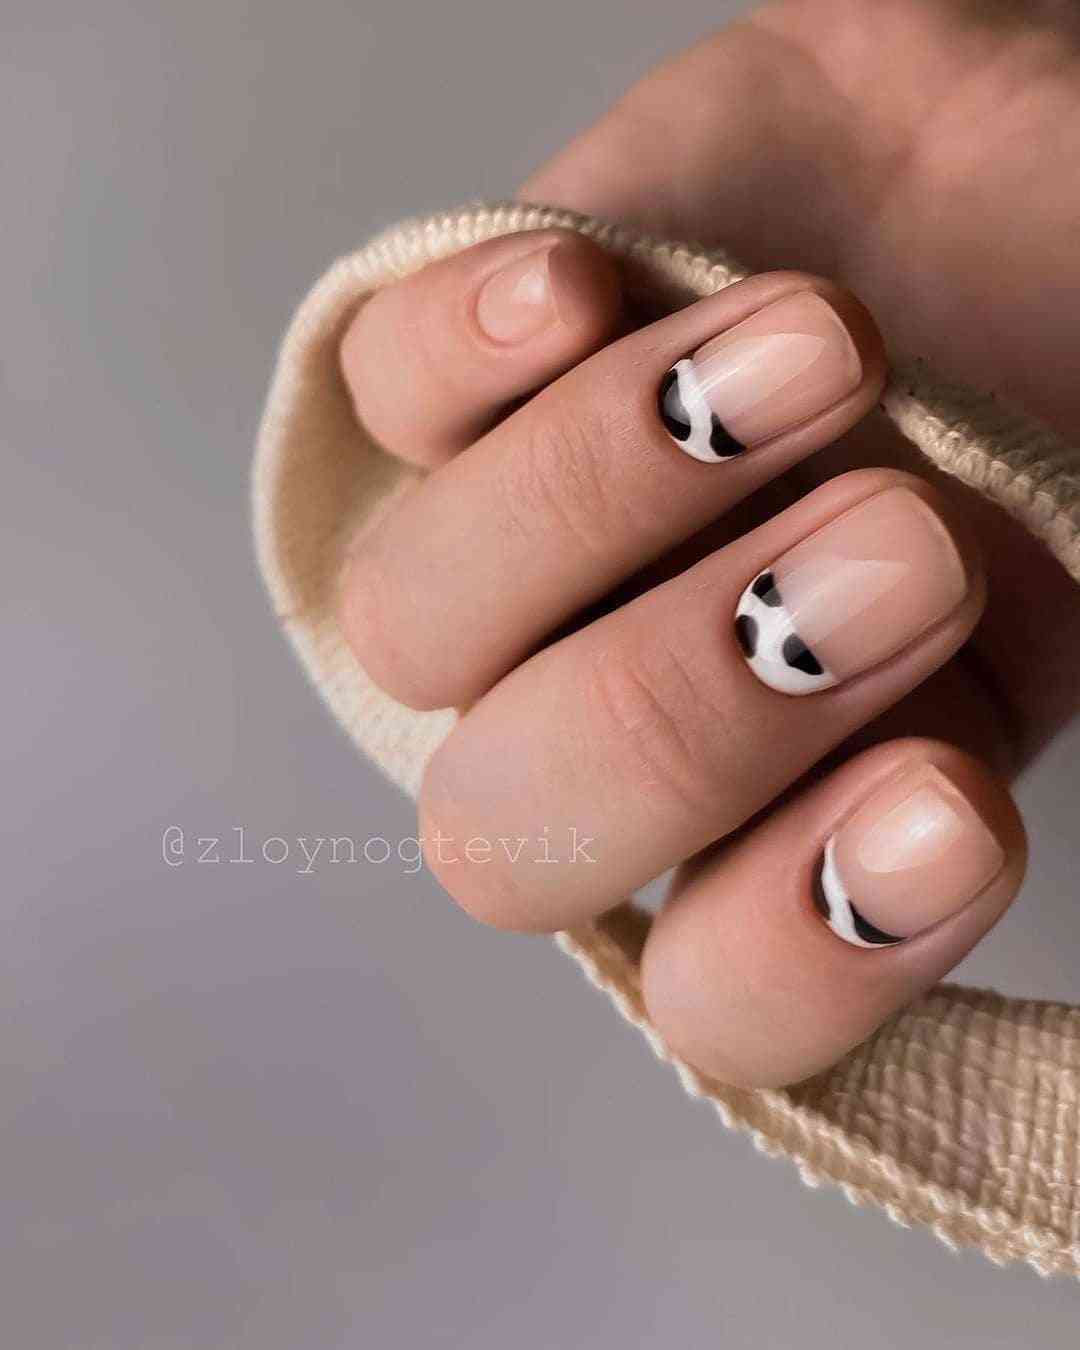 20 Cute Fall Nail Designs To Try In 2021 images 9